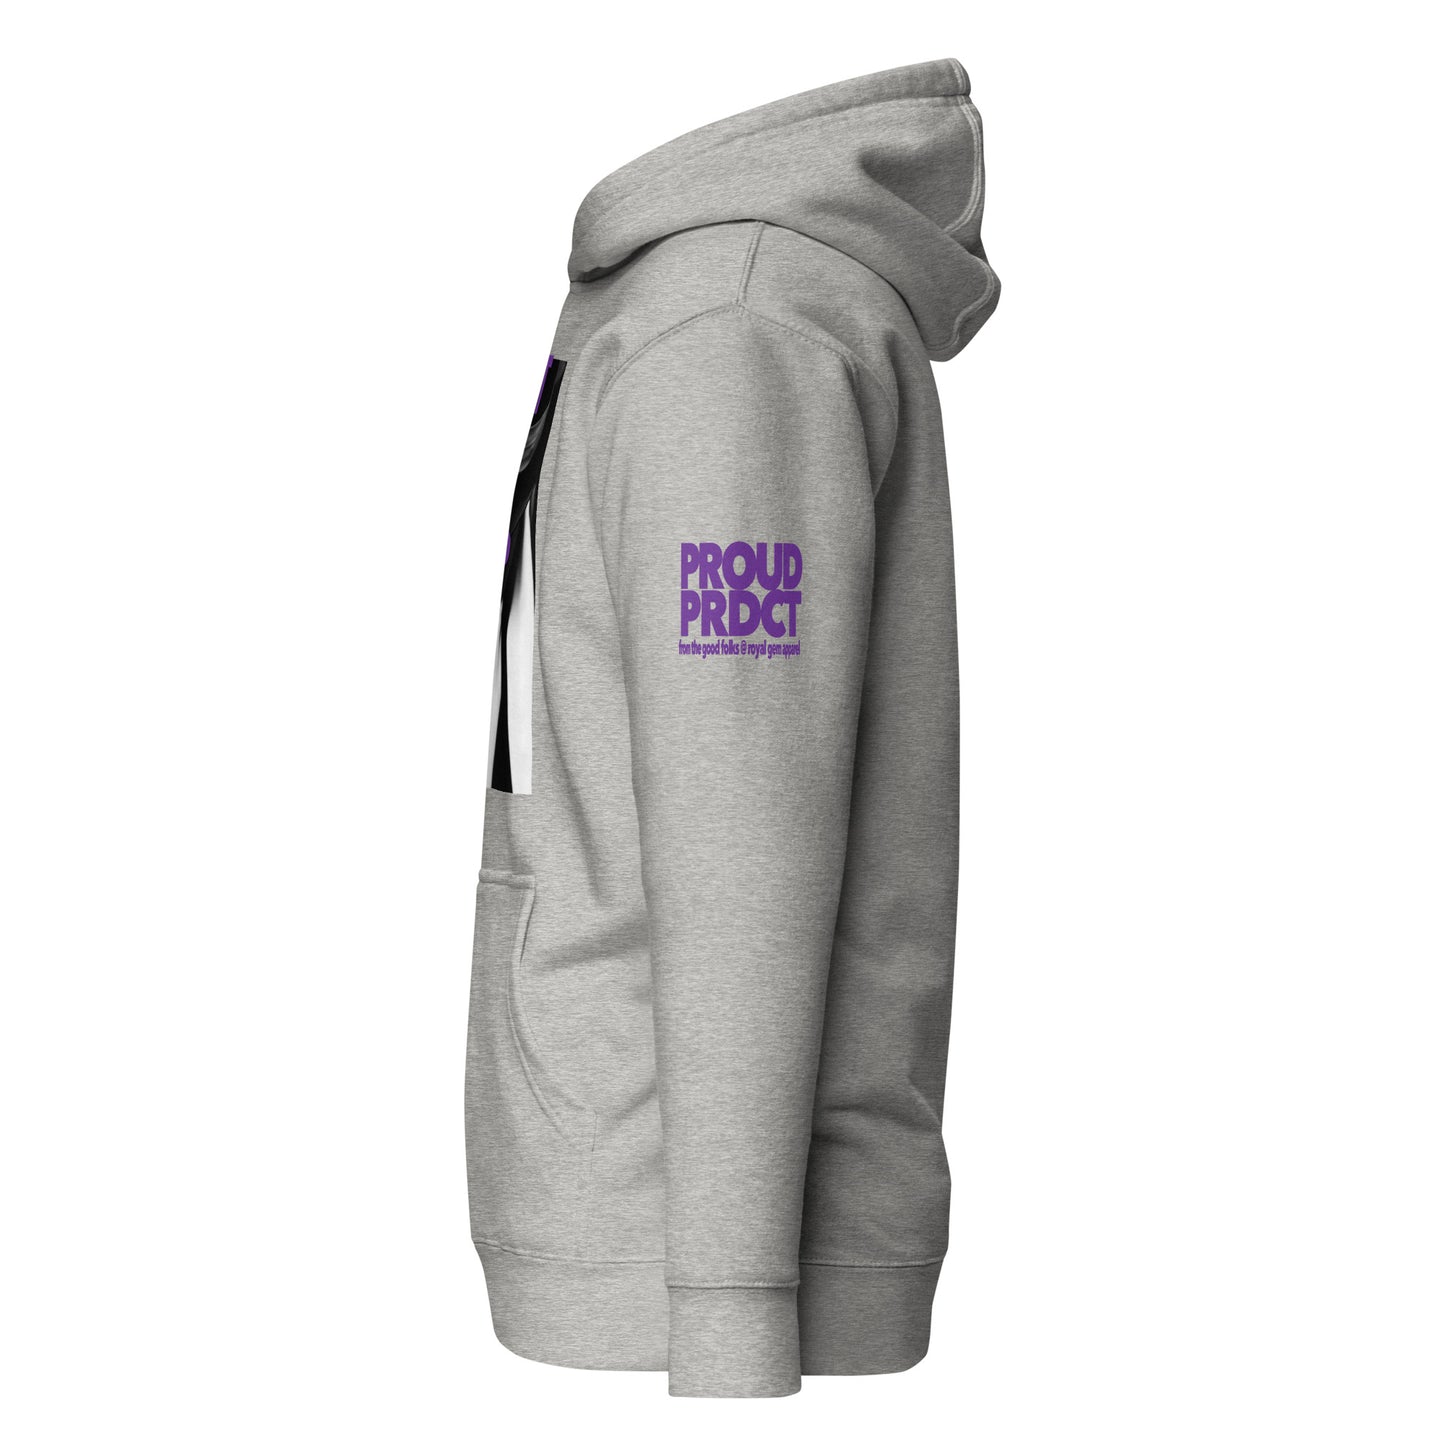 "Product of Hip-Hop" Hoodie (Limited Edition)